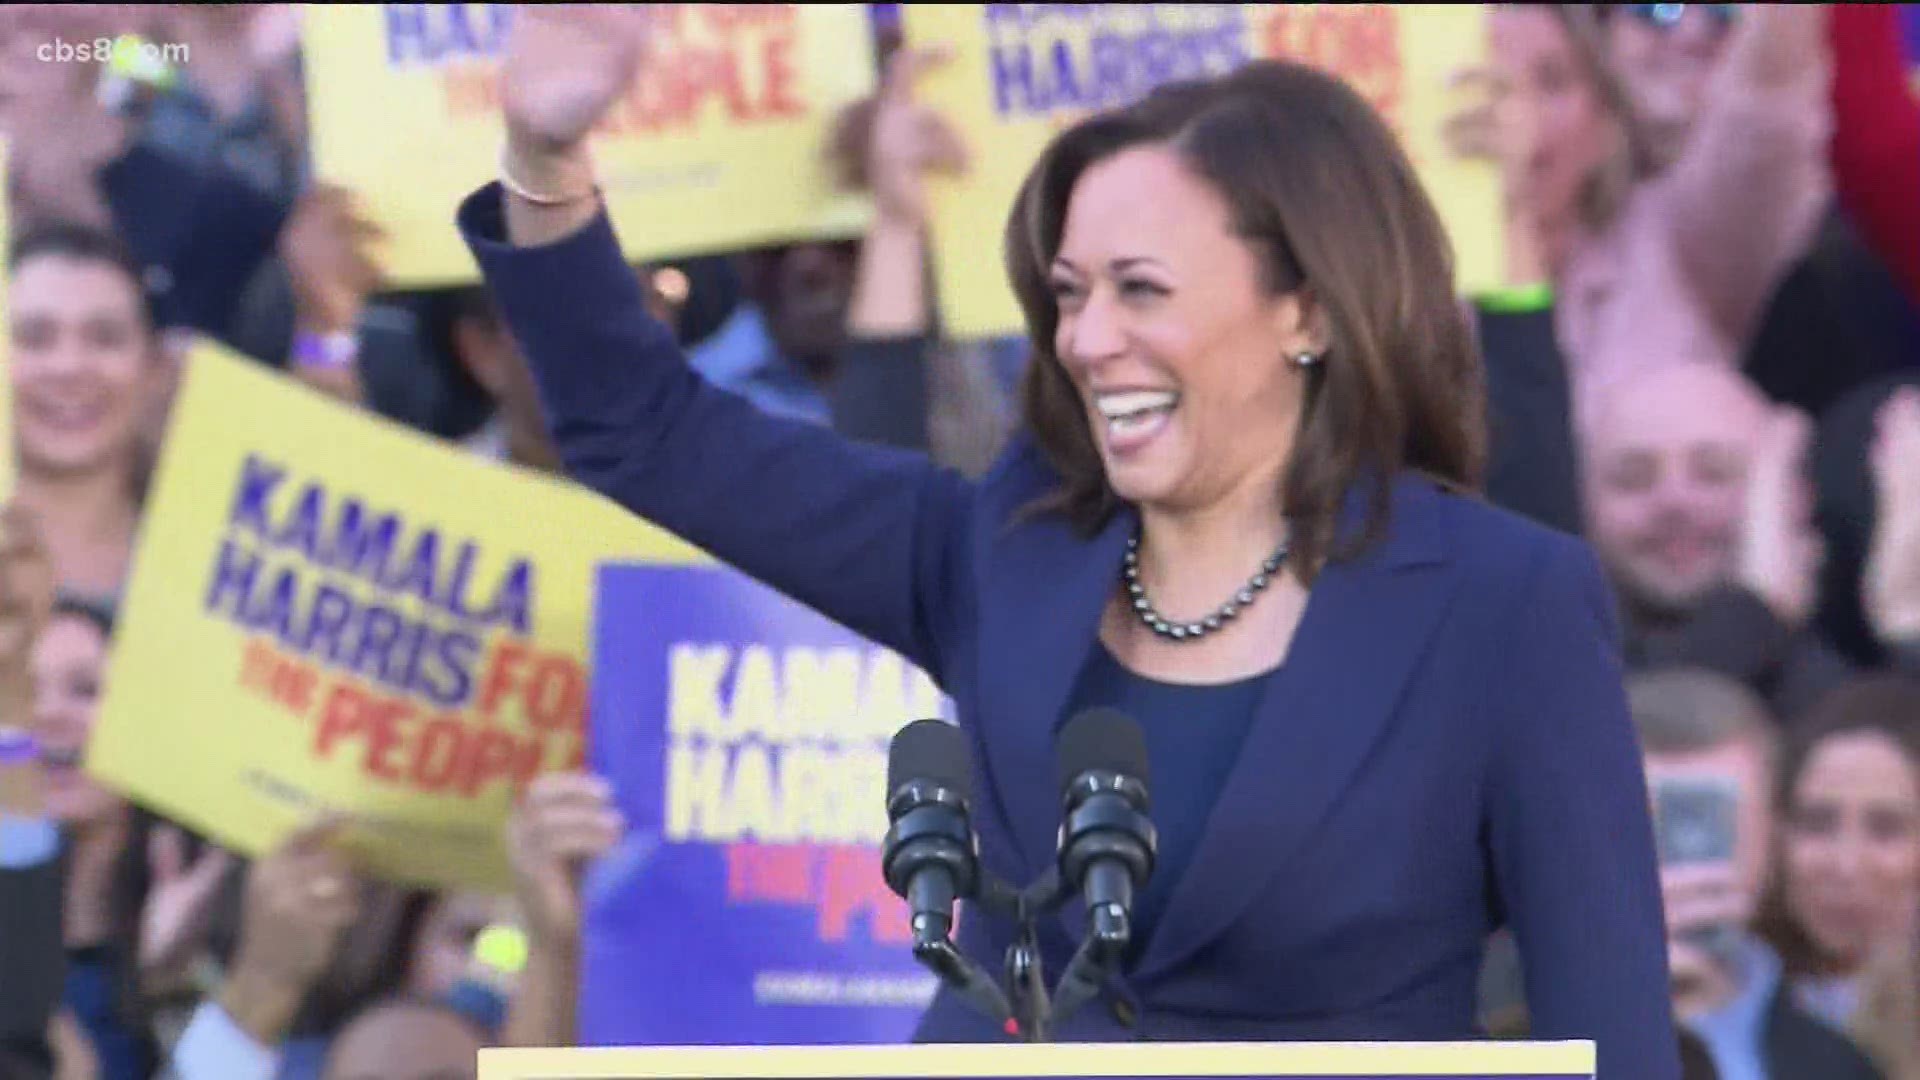 Harris, 55, is the first Black woman and first South Asian woman to run on the ticket of a major political party.